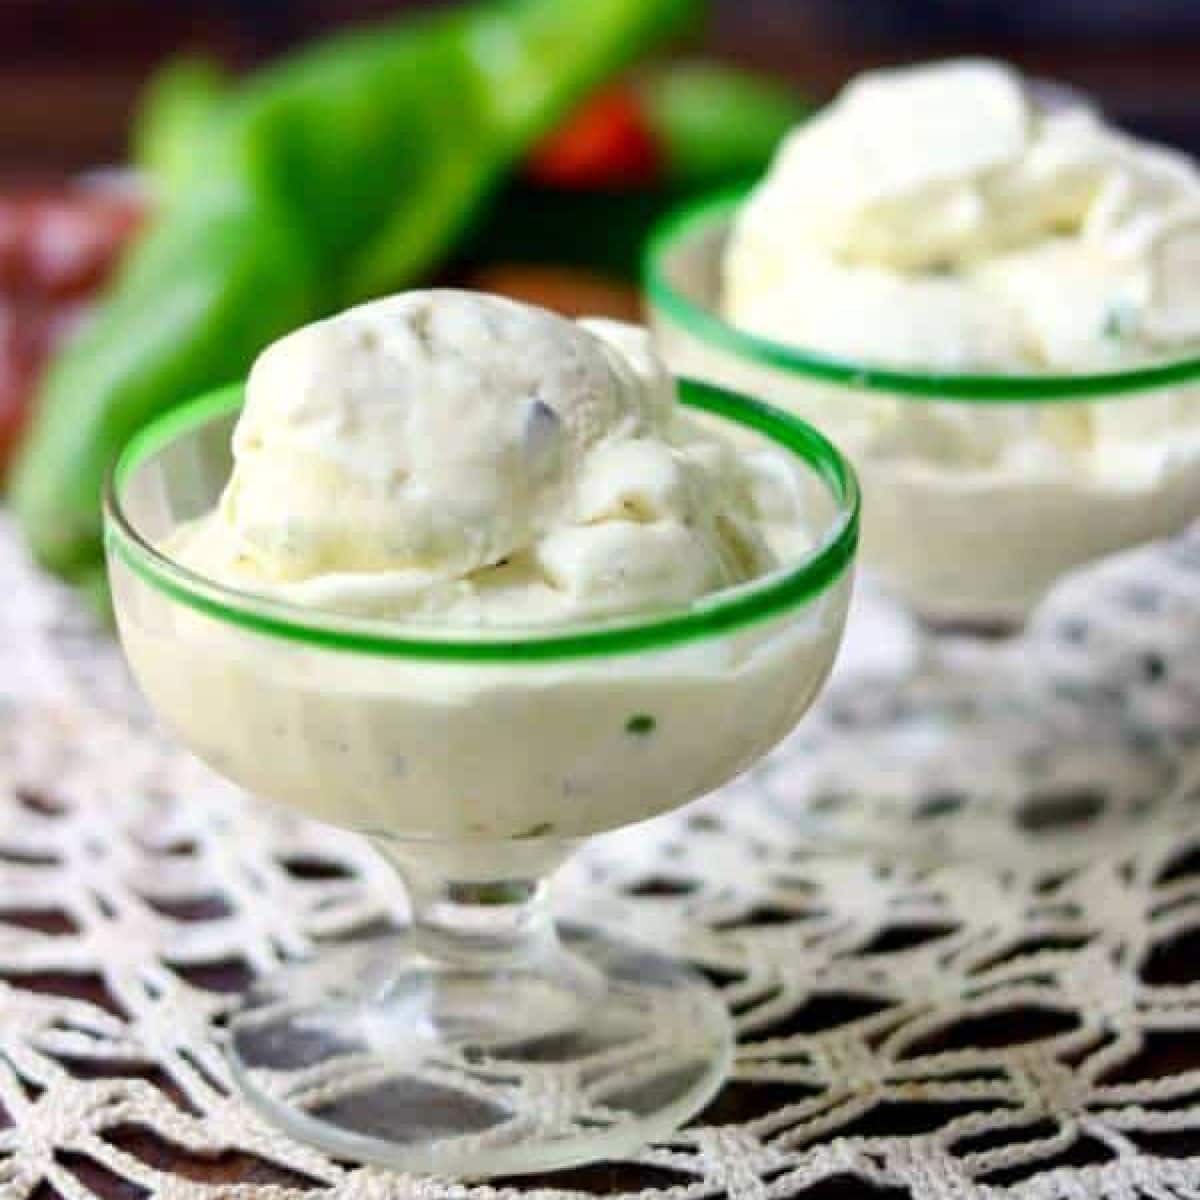 Two ice cream dishes with key lime gelato in them.